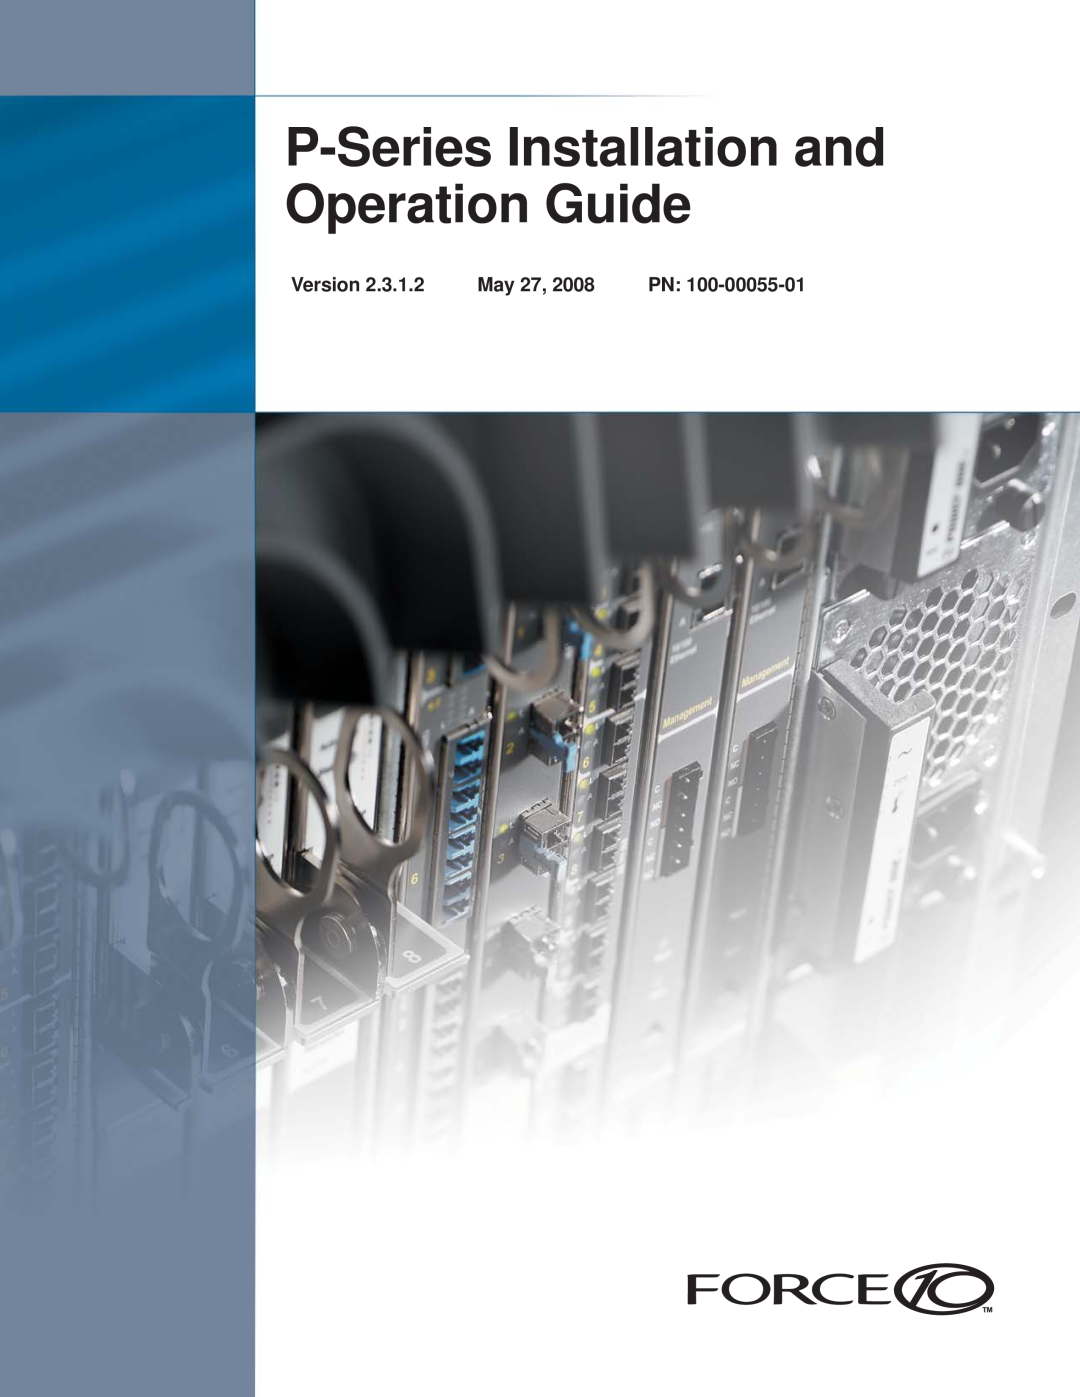 Force10 Networks 100-00055-01 manual P-Series Installation and Operation Guide, Version, May 27 